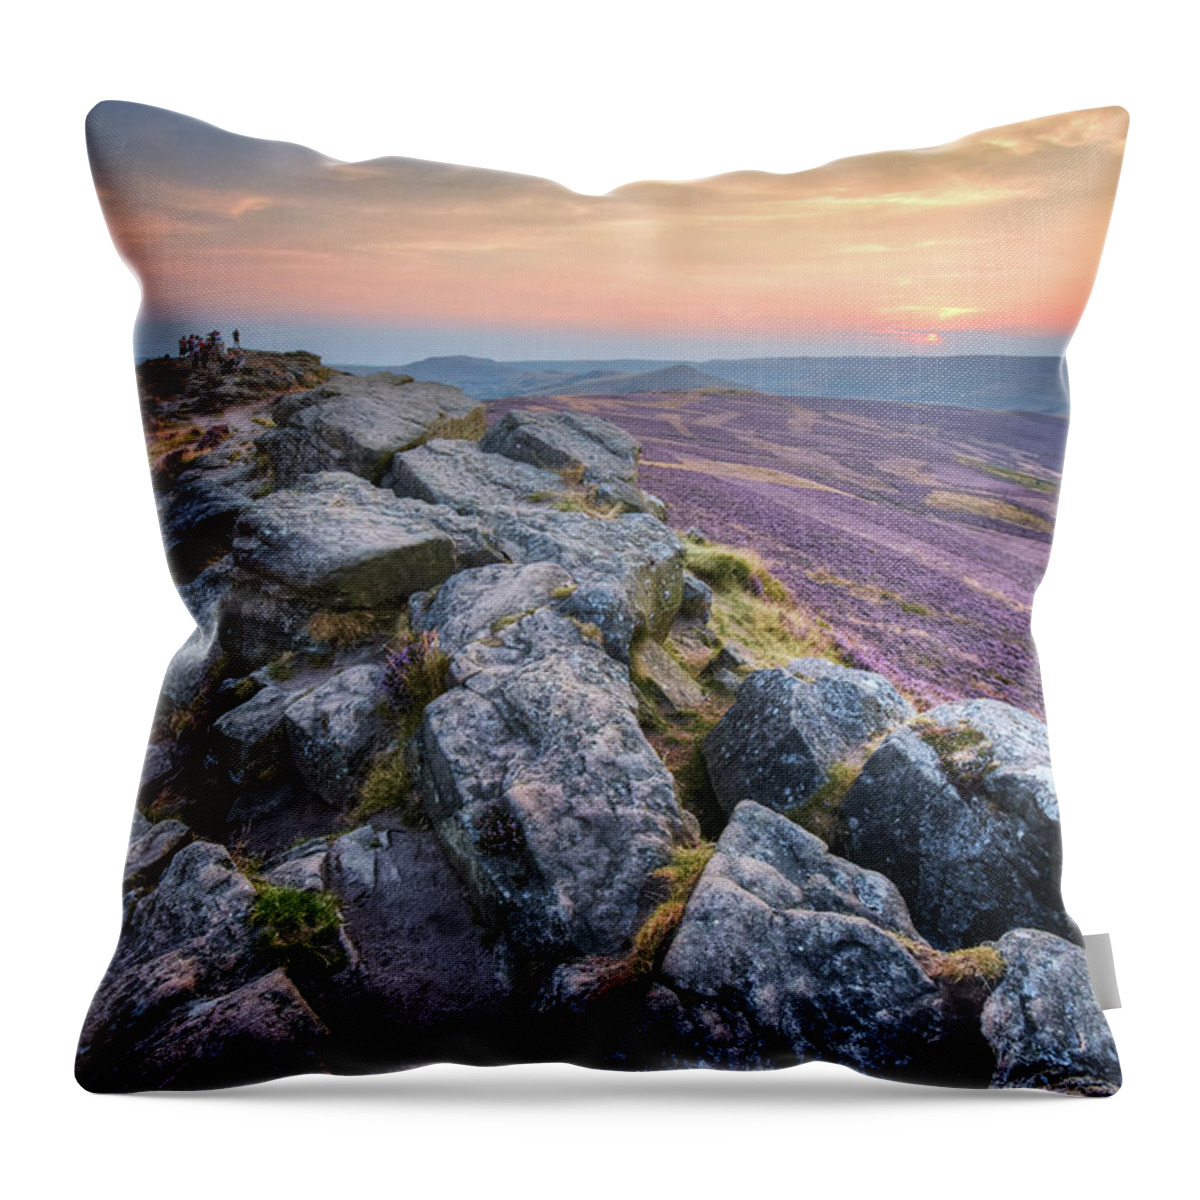 Flower Throw Pillow featuring the photograph Win Hill 2.0 by Yhun Suarez